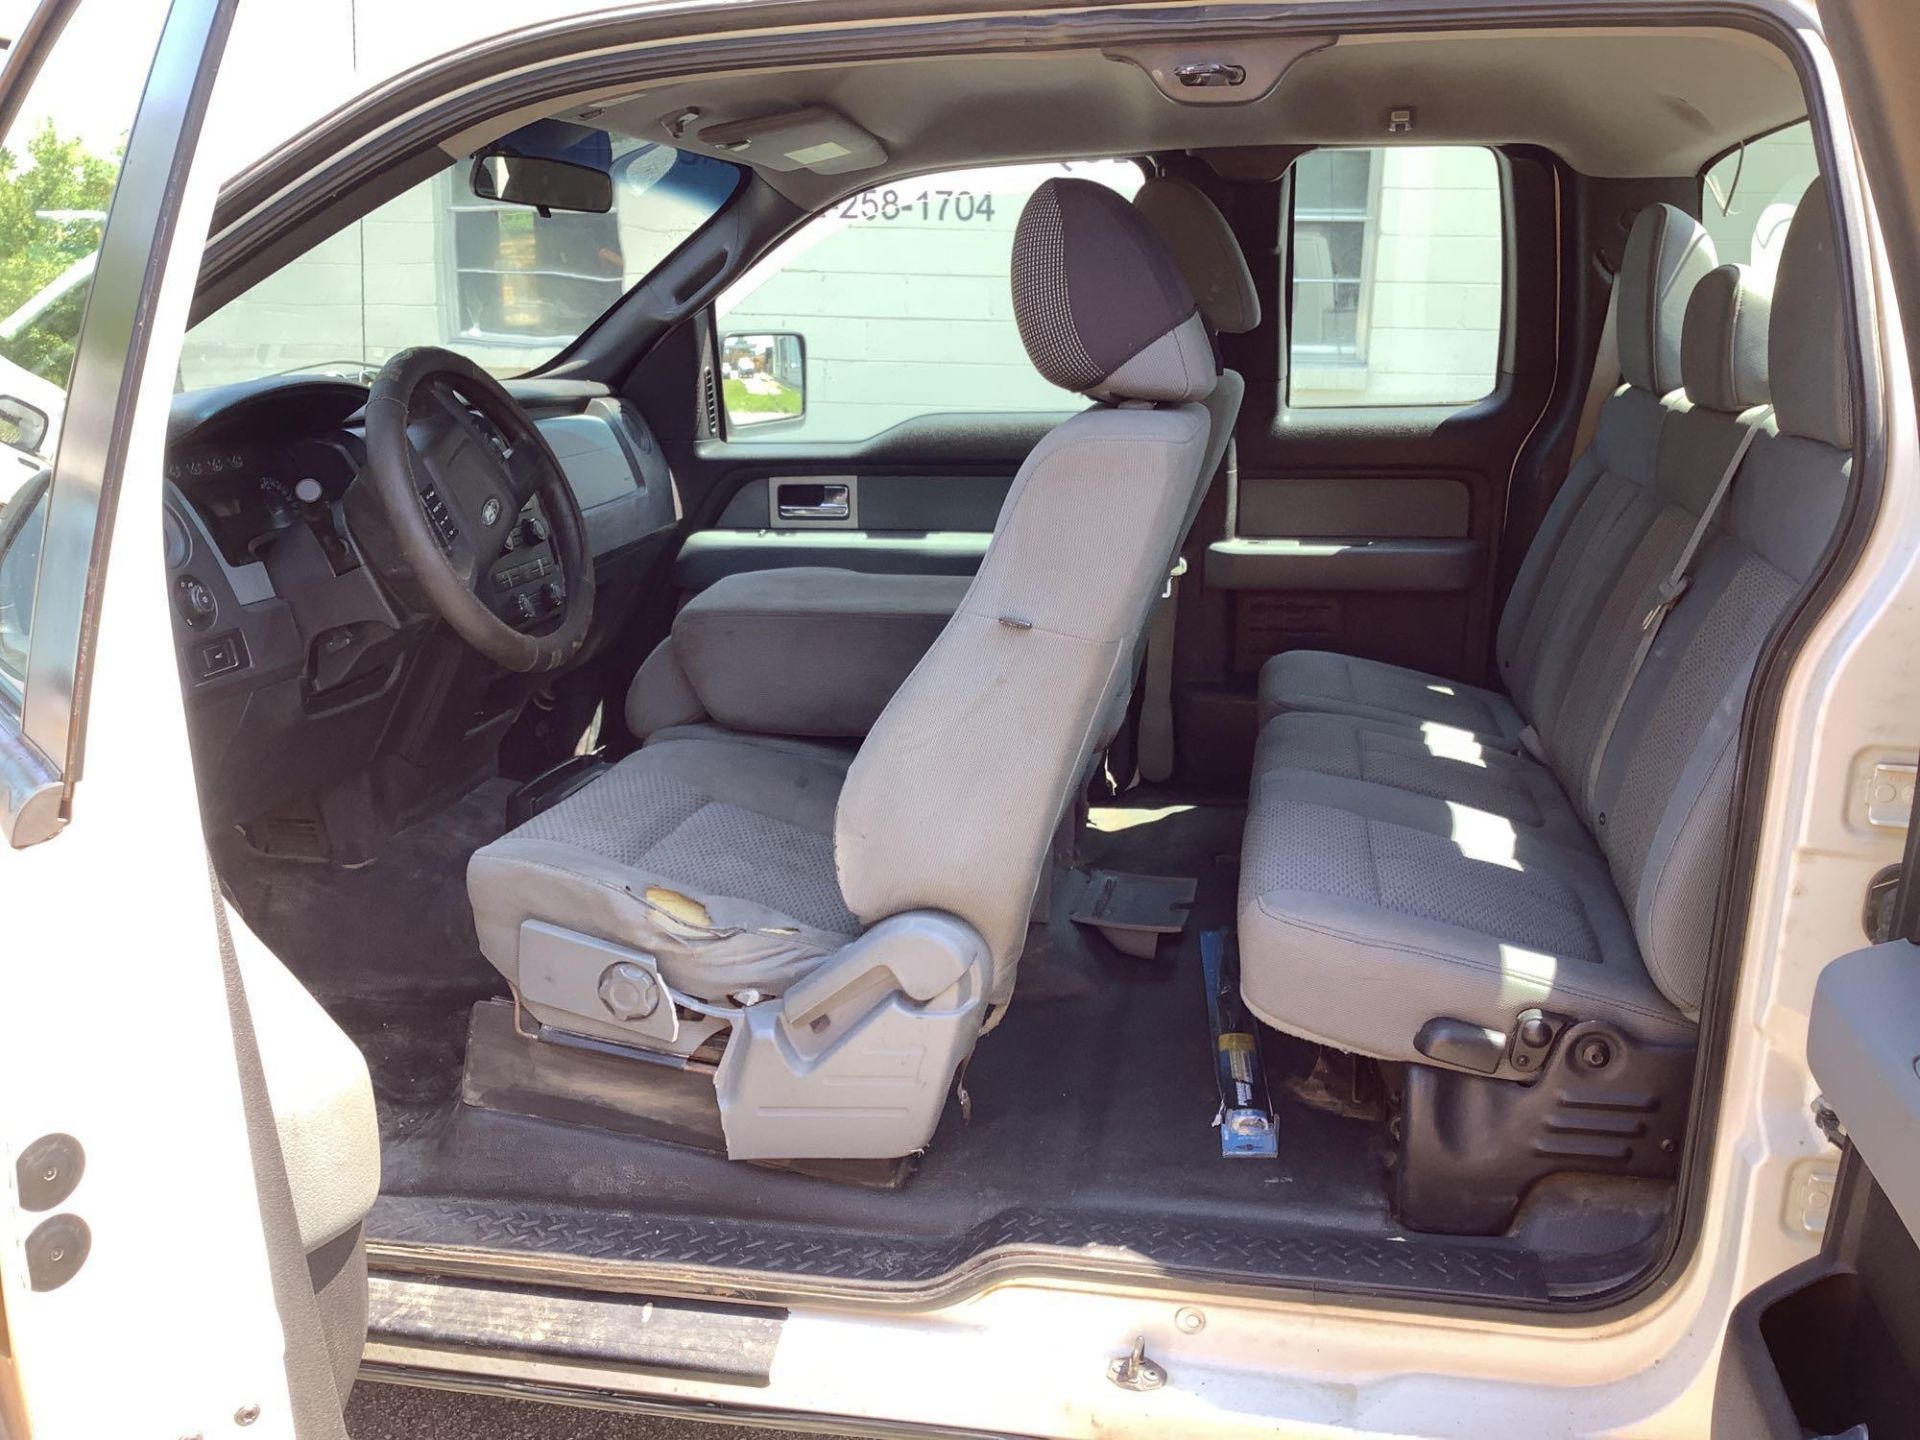 2011 Ford F-150 XL Extended Cab Truck - Image 5 of 35